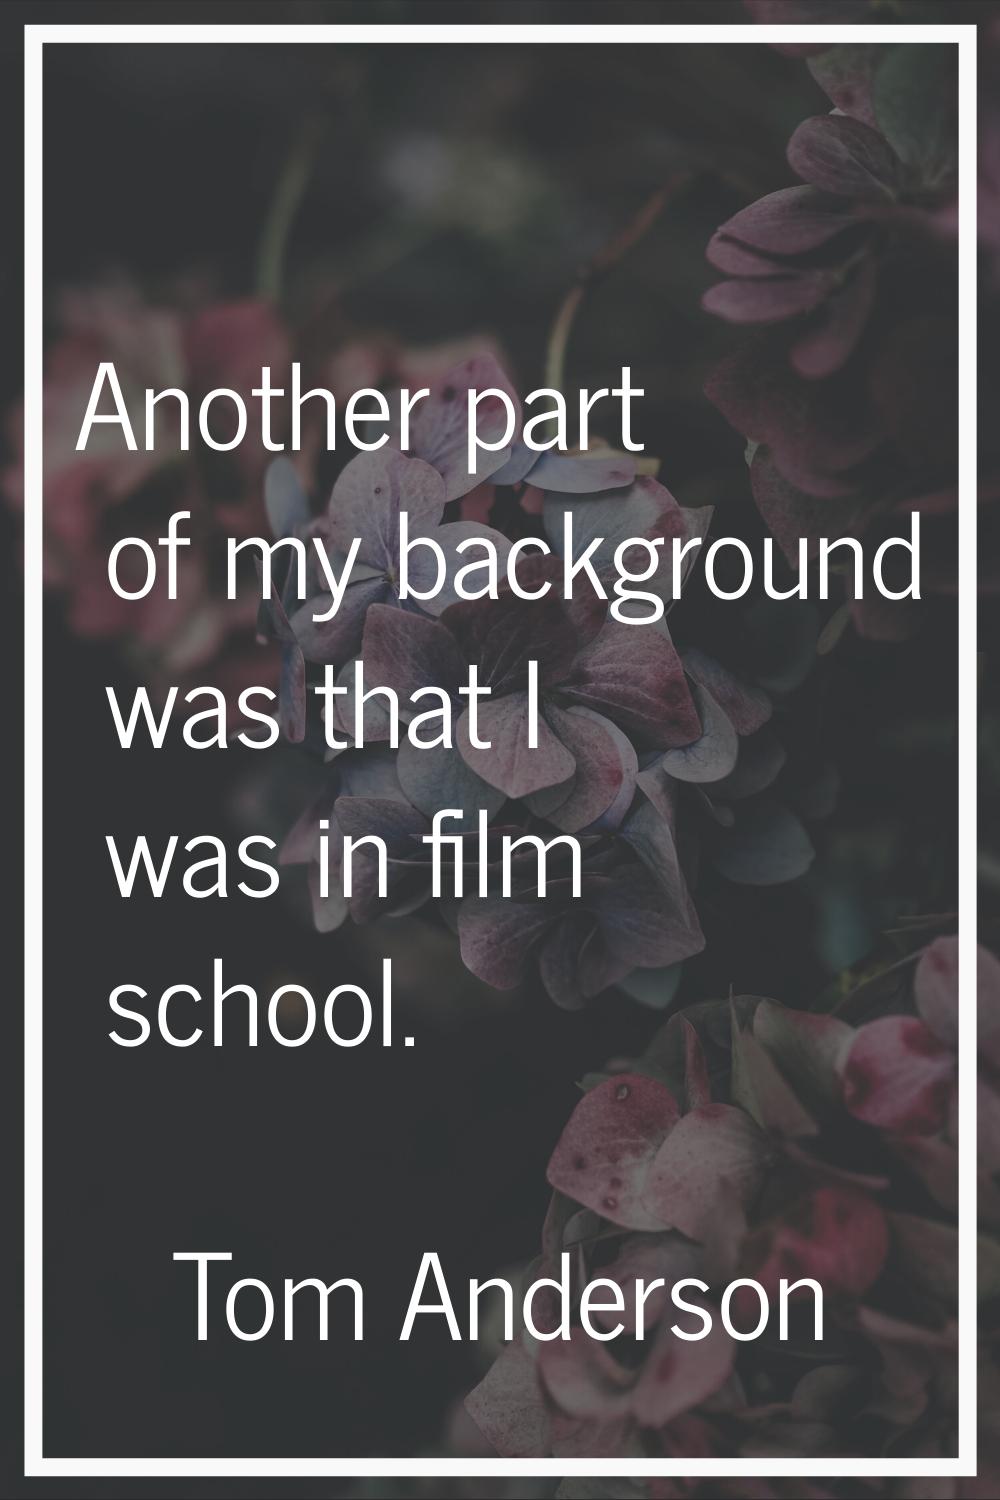 Another part of my background was that I was in film school.